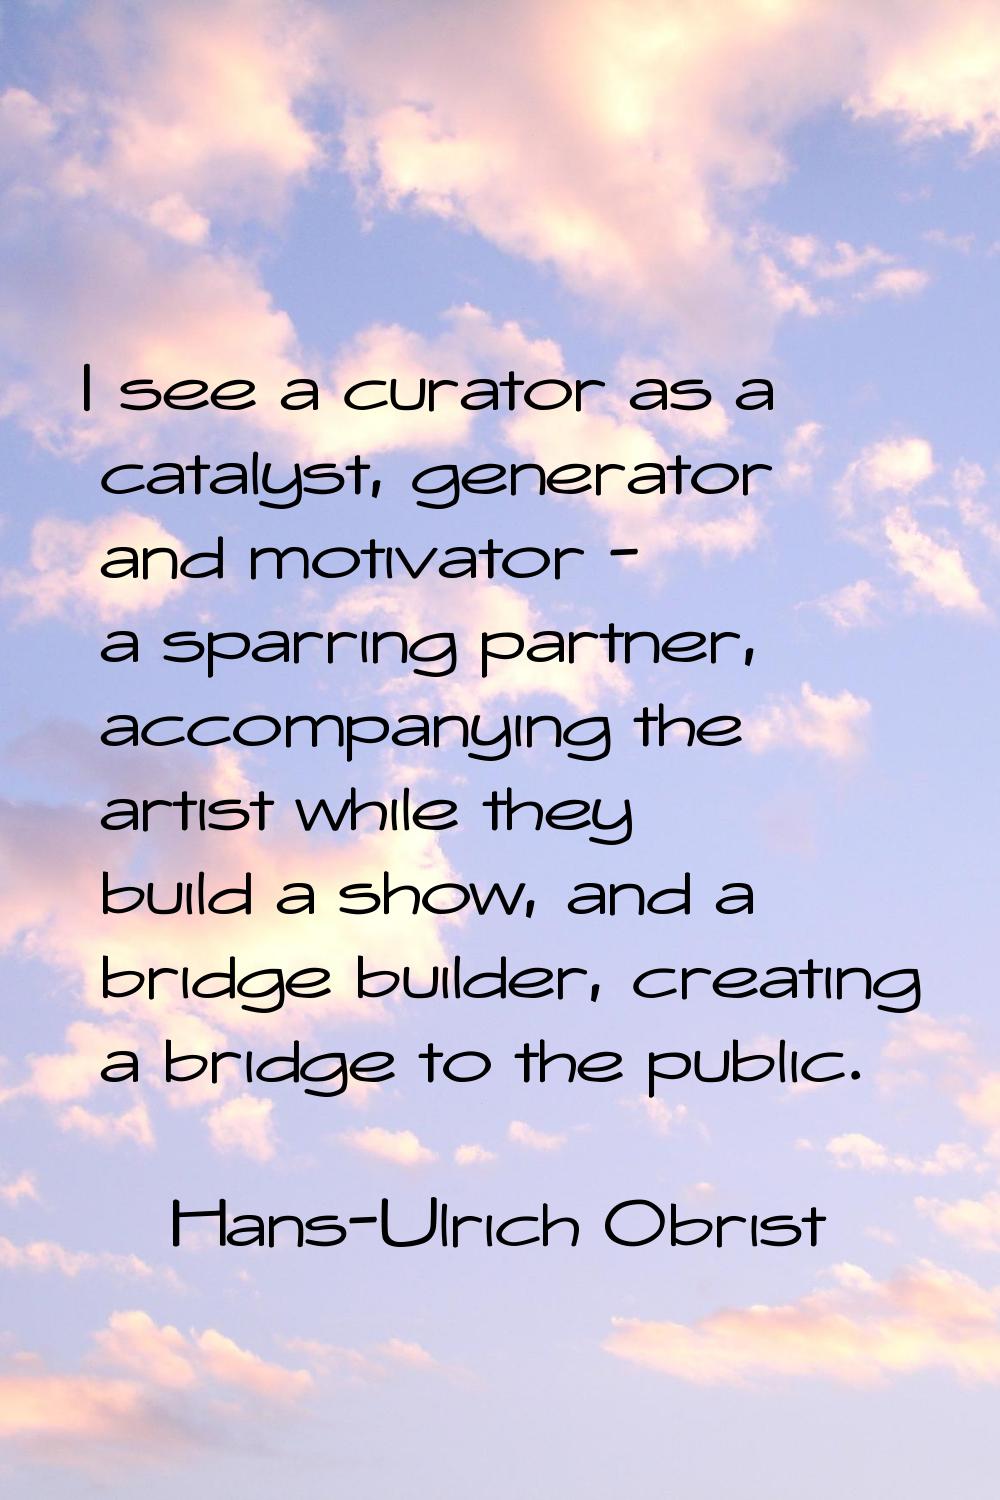 I see a curator as a catalyst, generator and motivator - a sparring partner, accompanying the artis